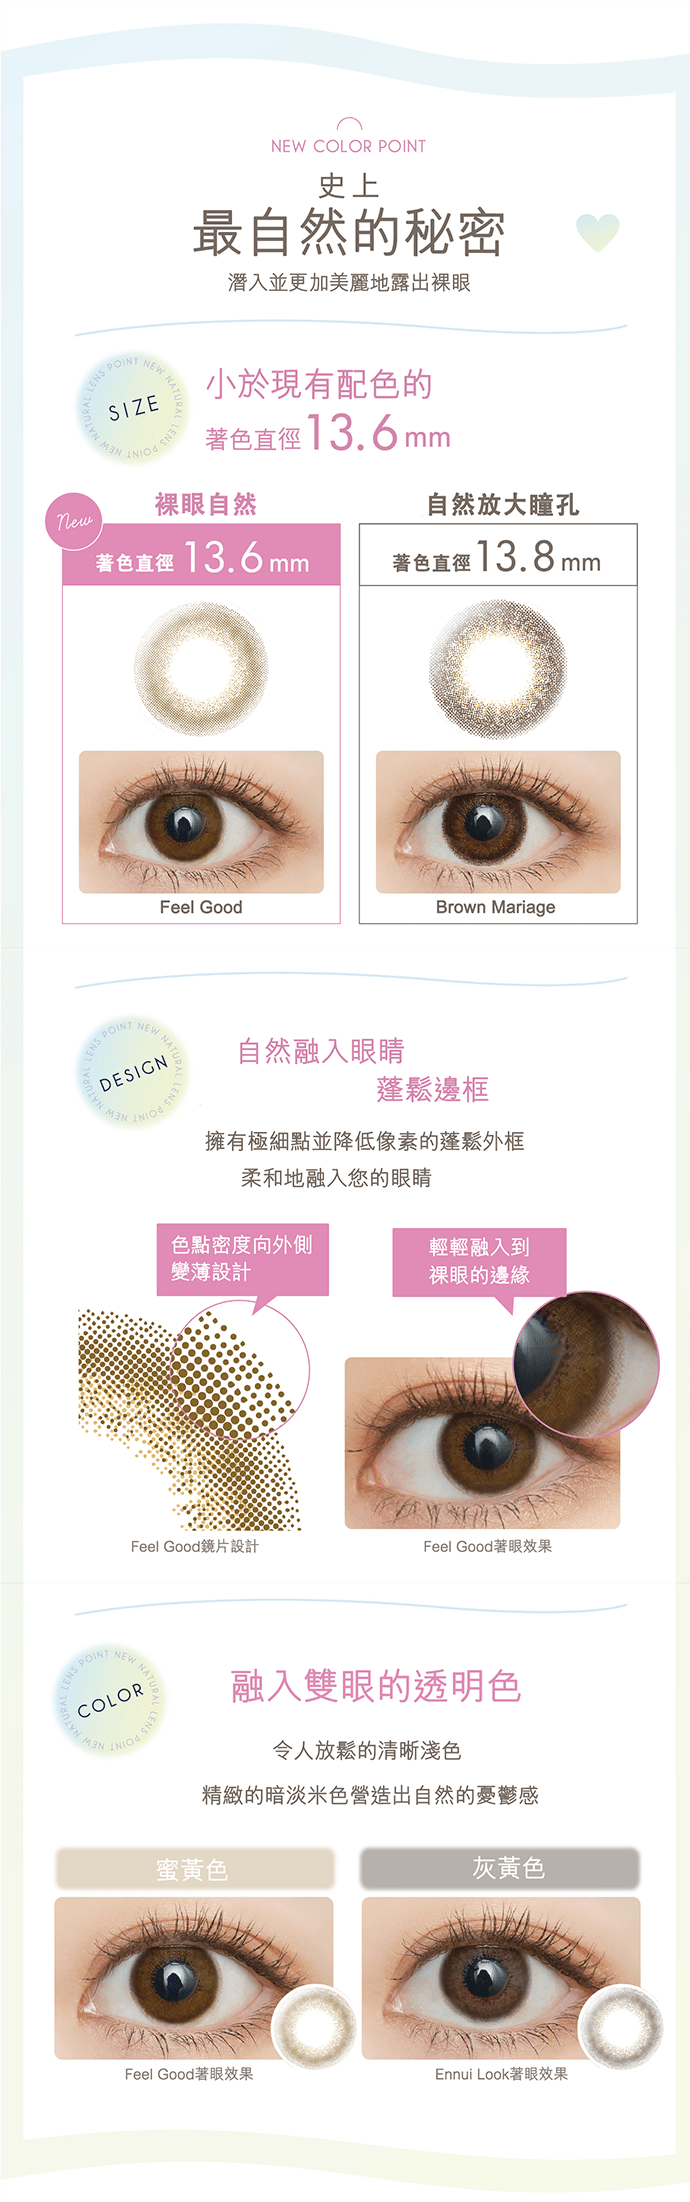 EverColor 1 Day Natural Moist Label Brown Mariage 有色每日抛棄隱形眼鏡 (10片裝)